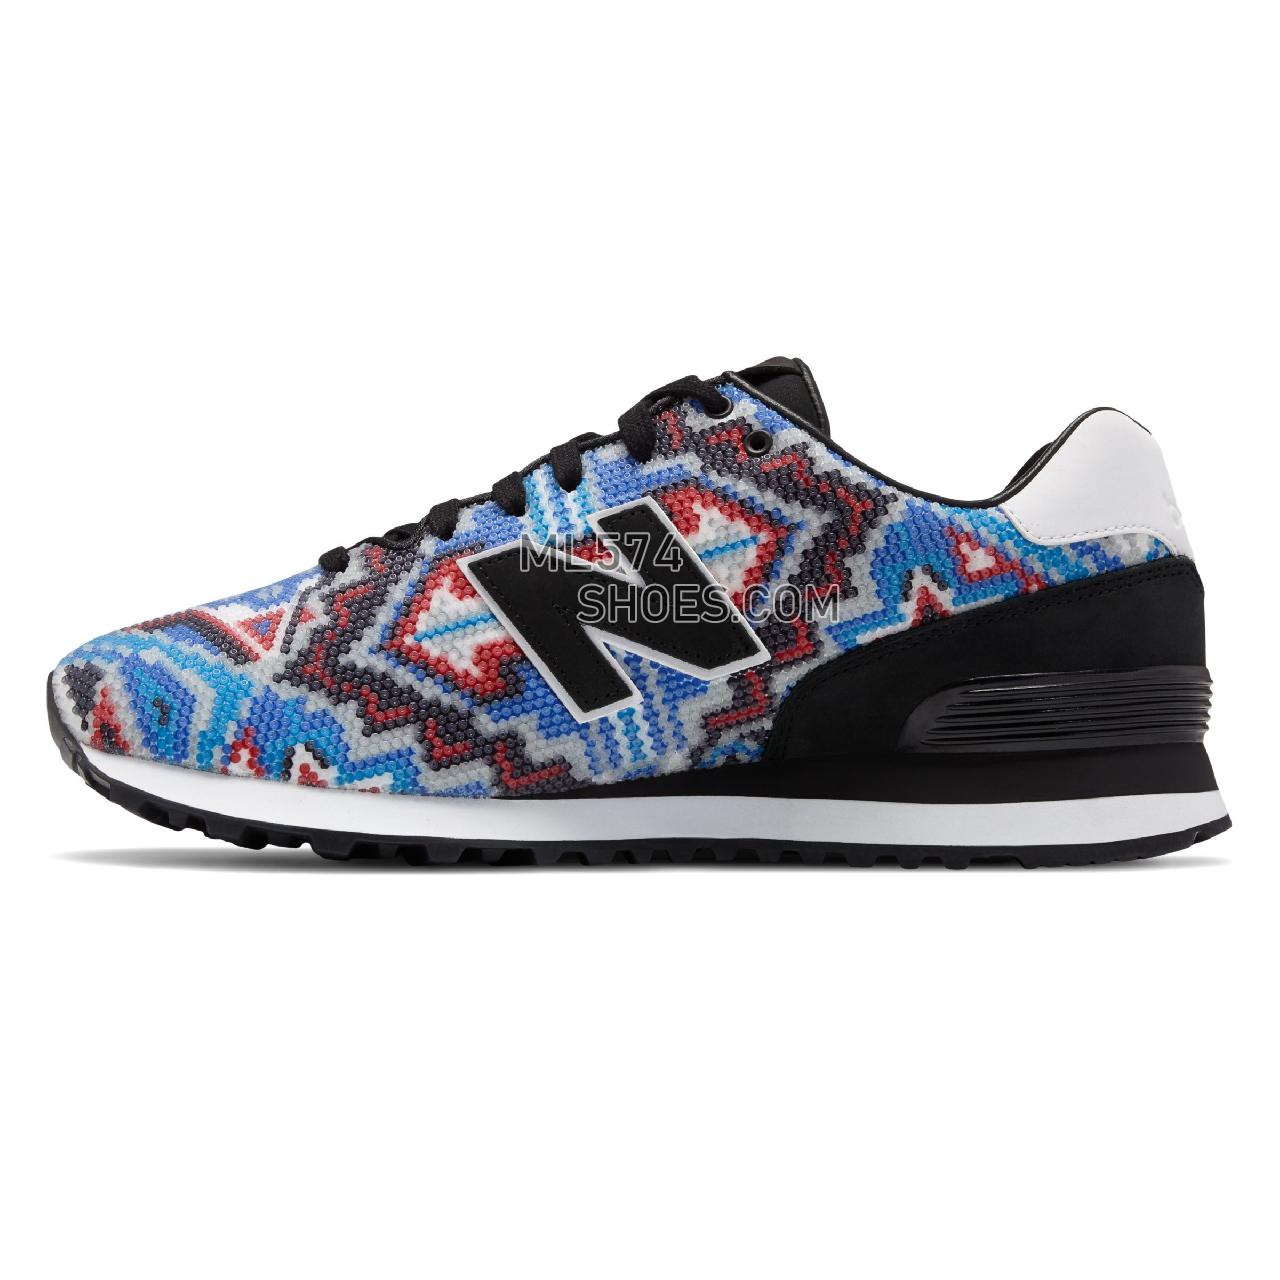 New Balance Ricardo Seco x New Balance 574 - Unisex 574 - Classic Blue with Red - UL574RS2